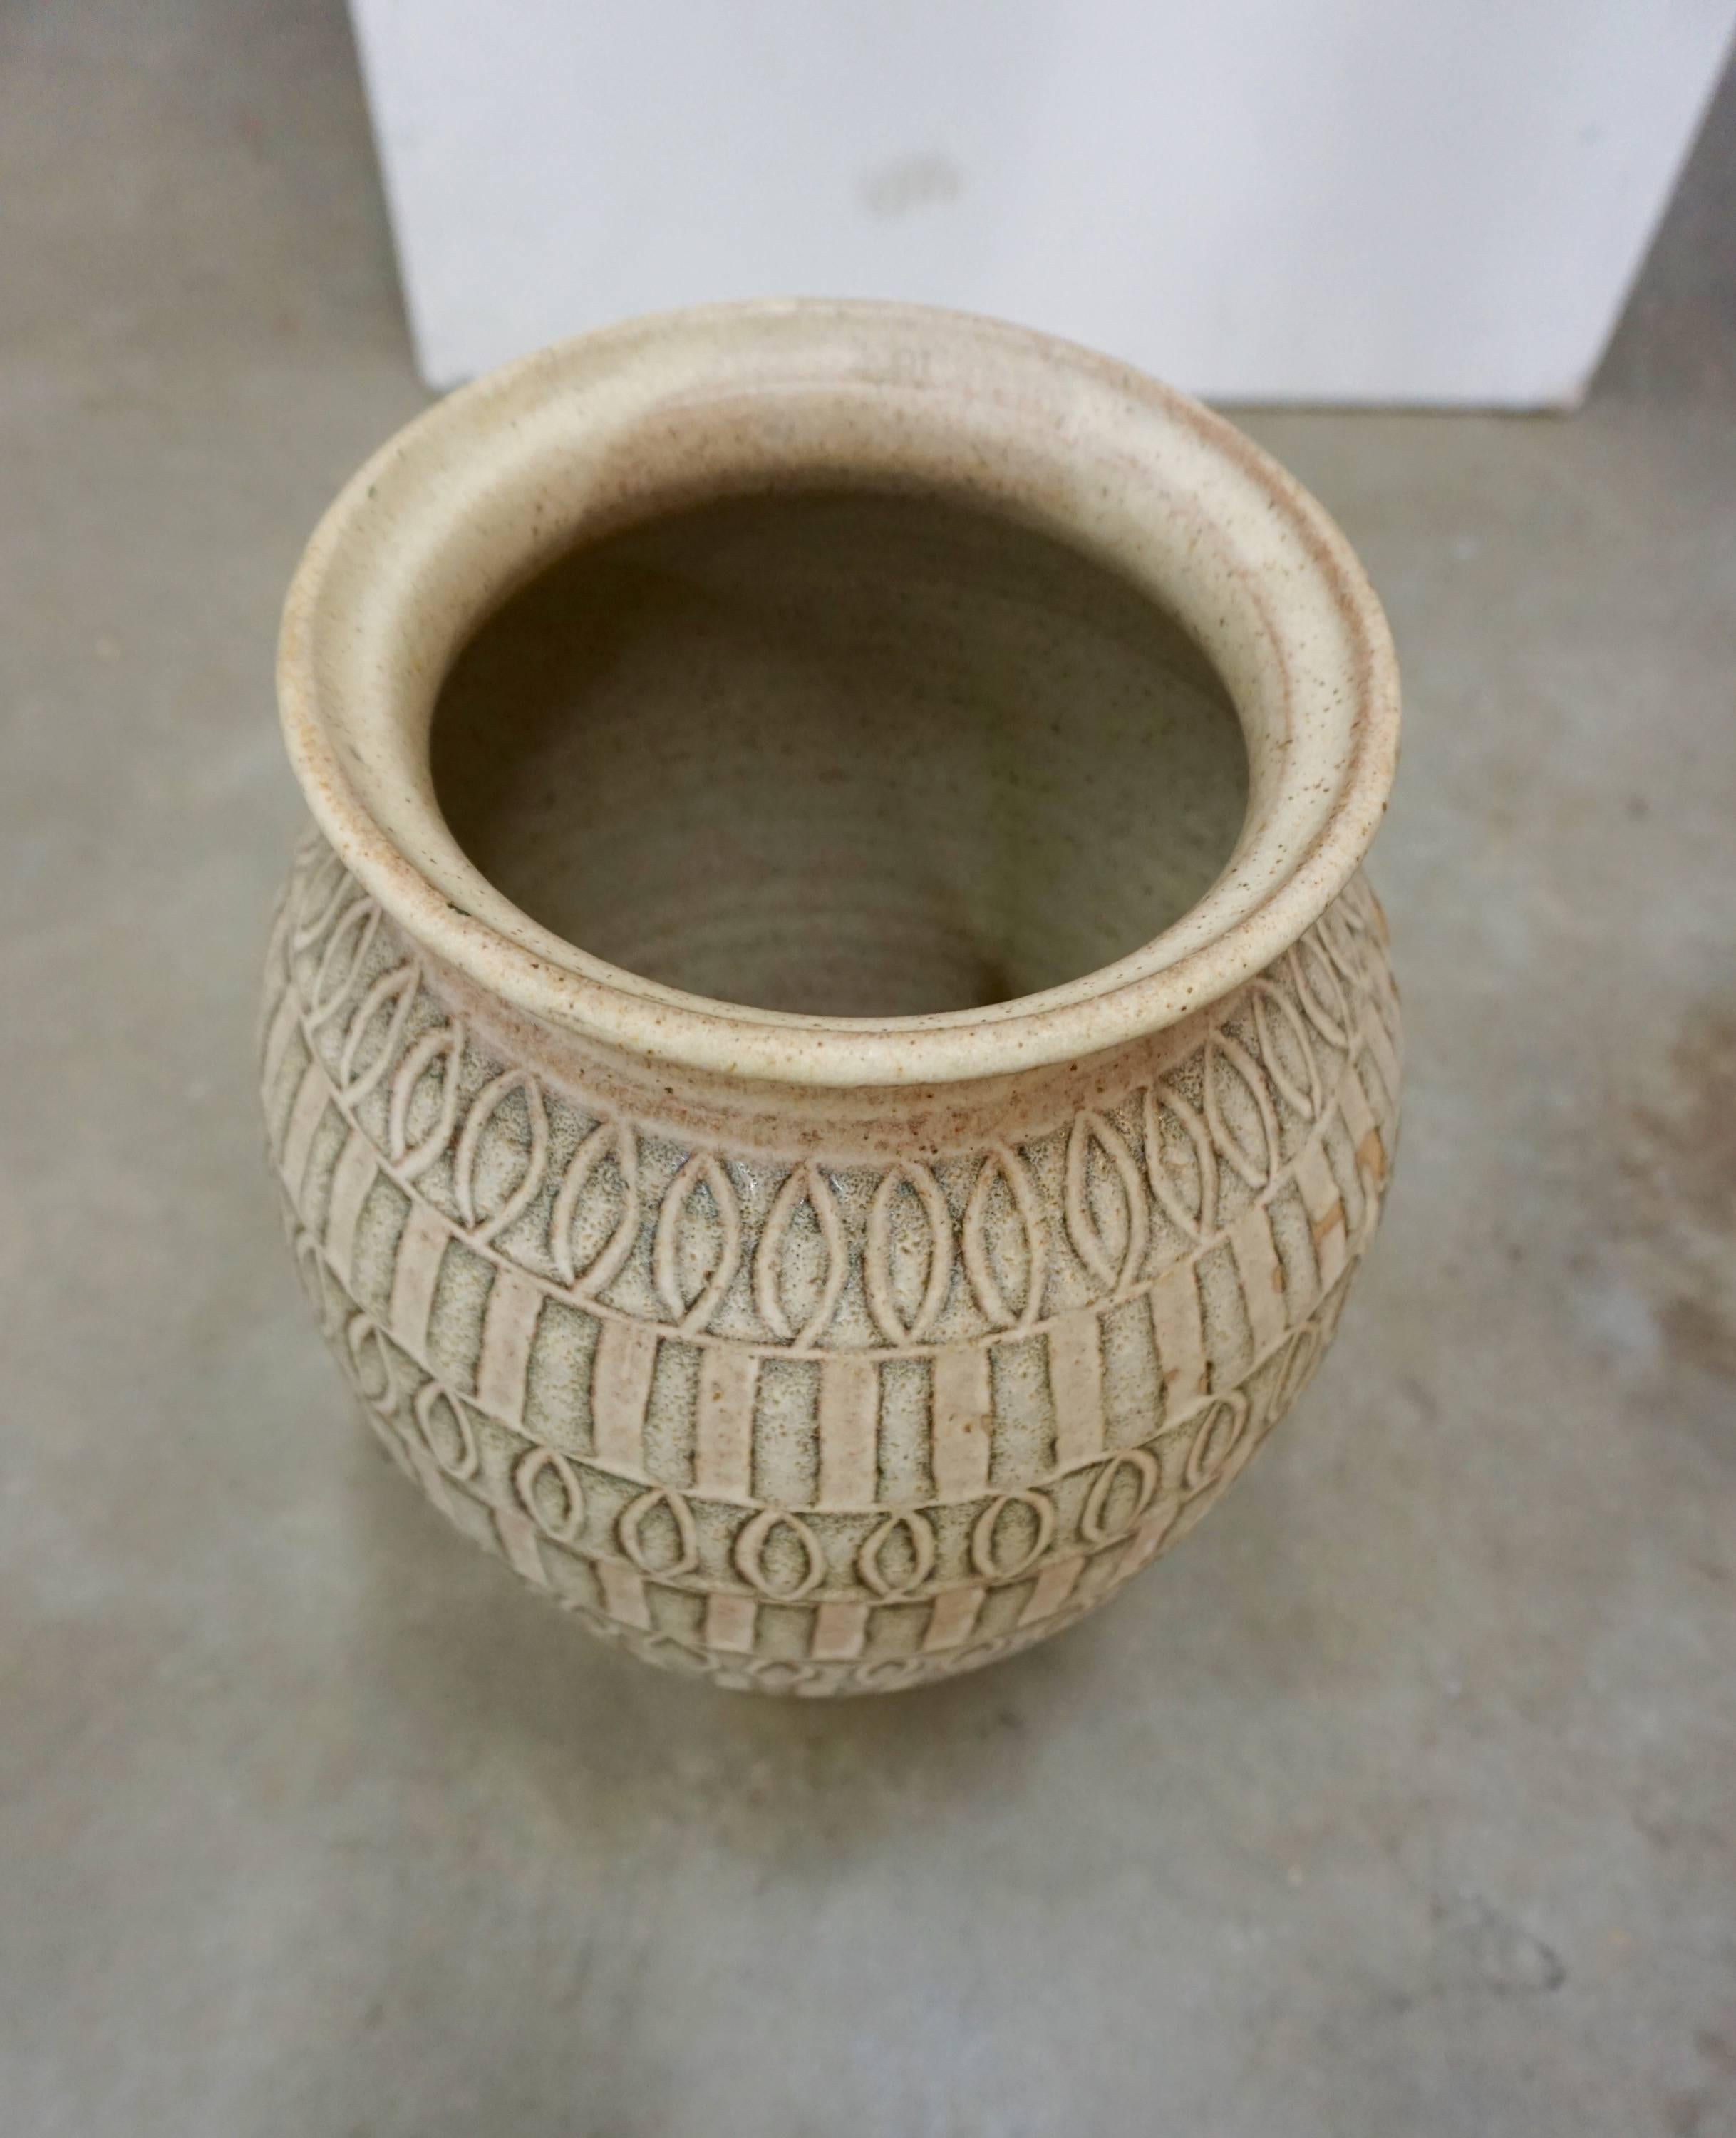 Glazed and incised with an interesting pattern. Could be used as an umbrella stand, planter or purely for decorative value.